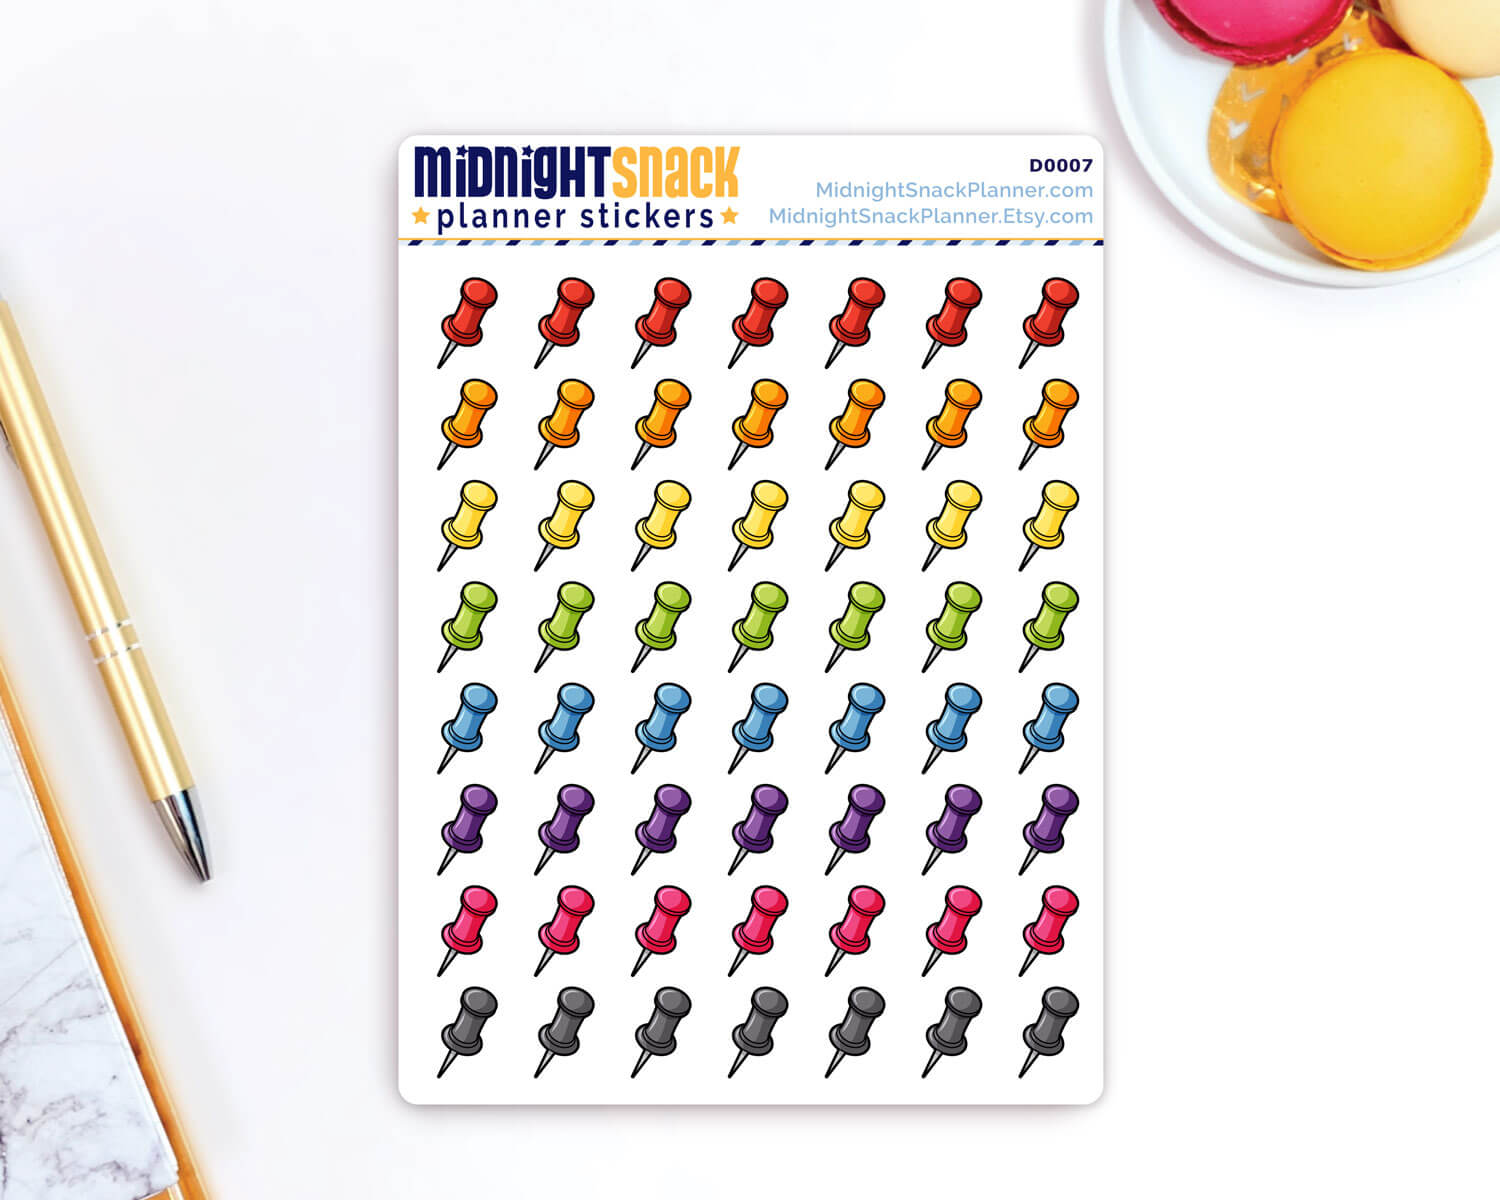 Push Pin Planner Stickers from Midnight Snack Planner